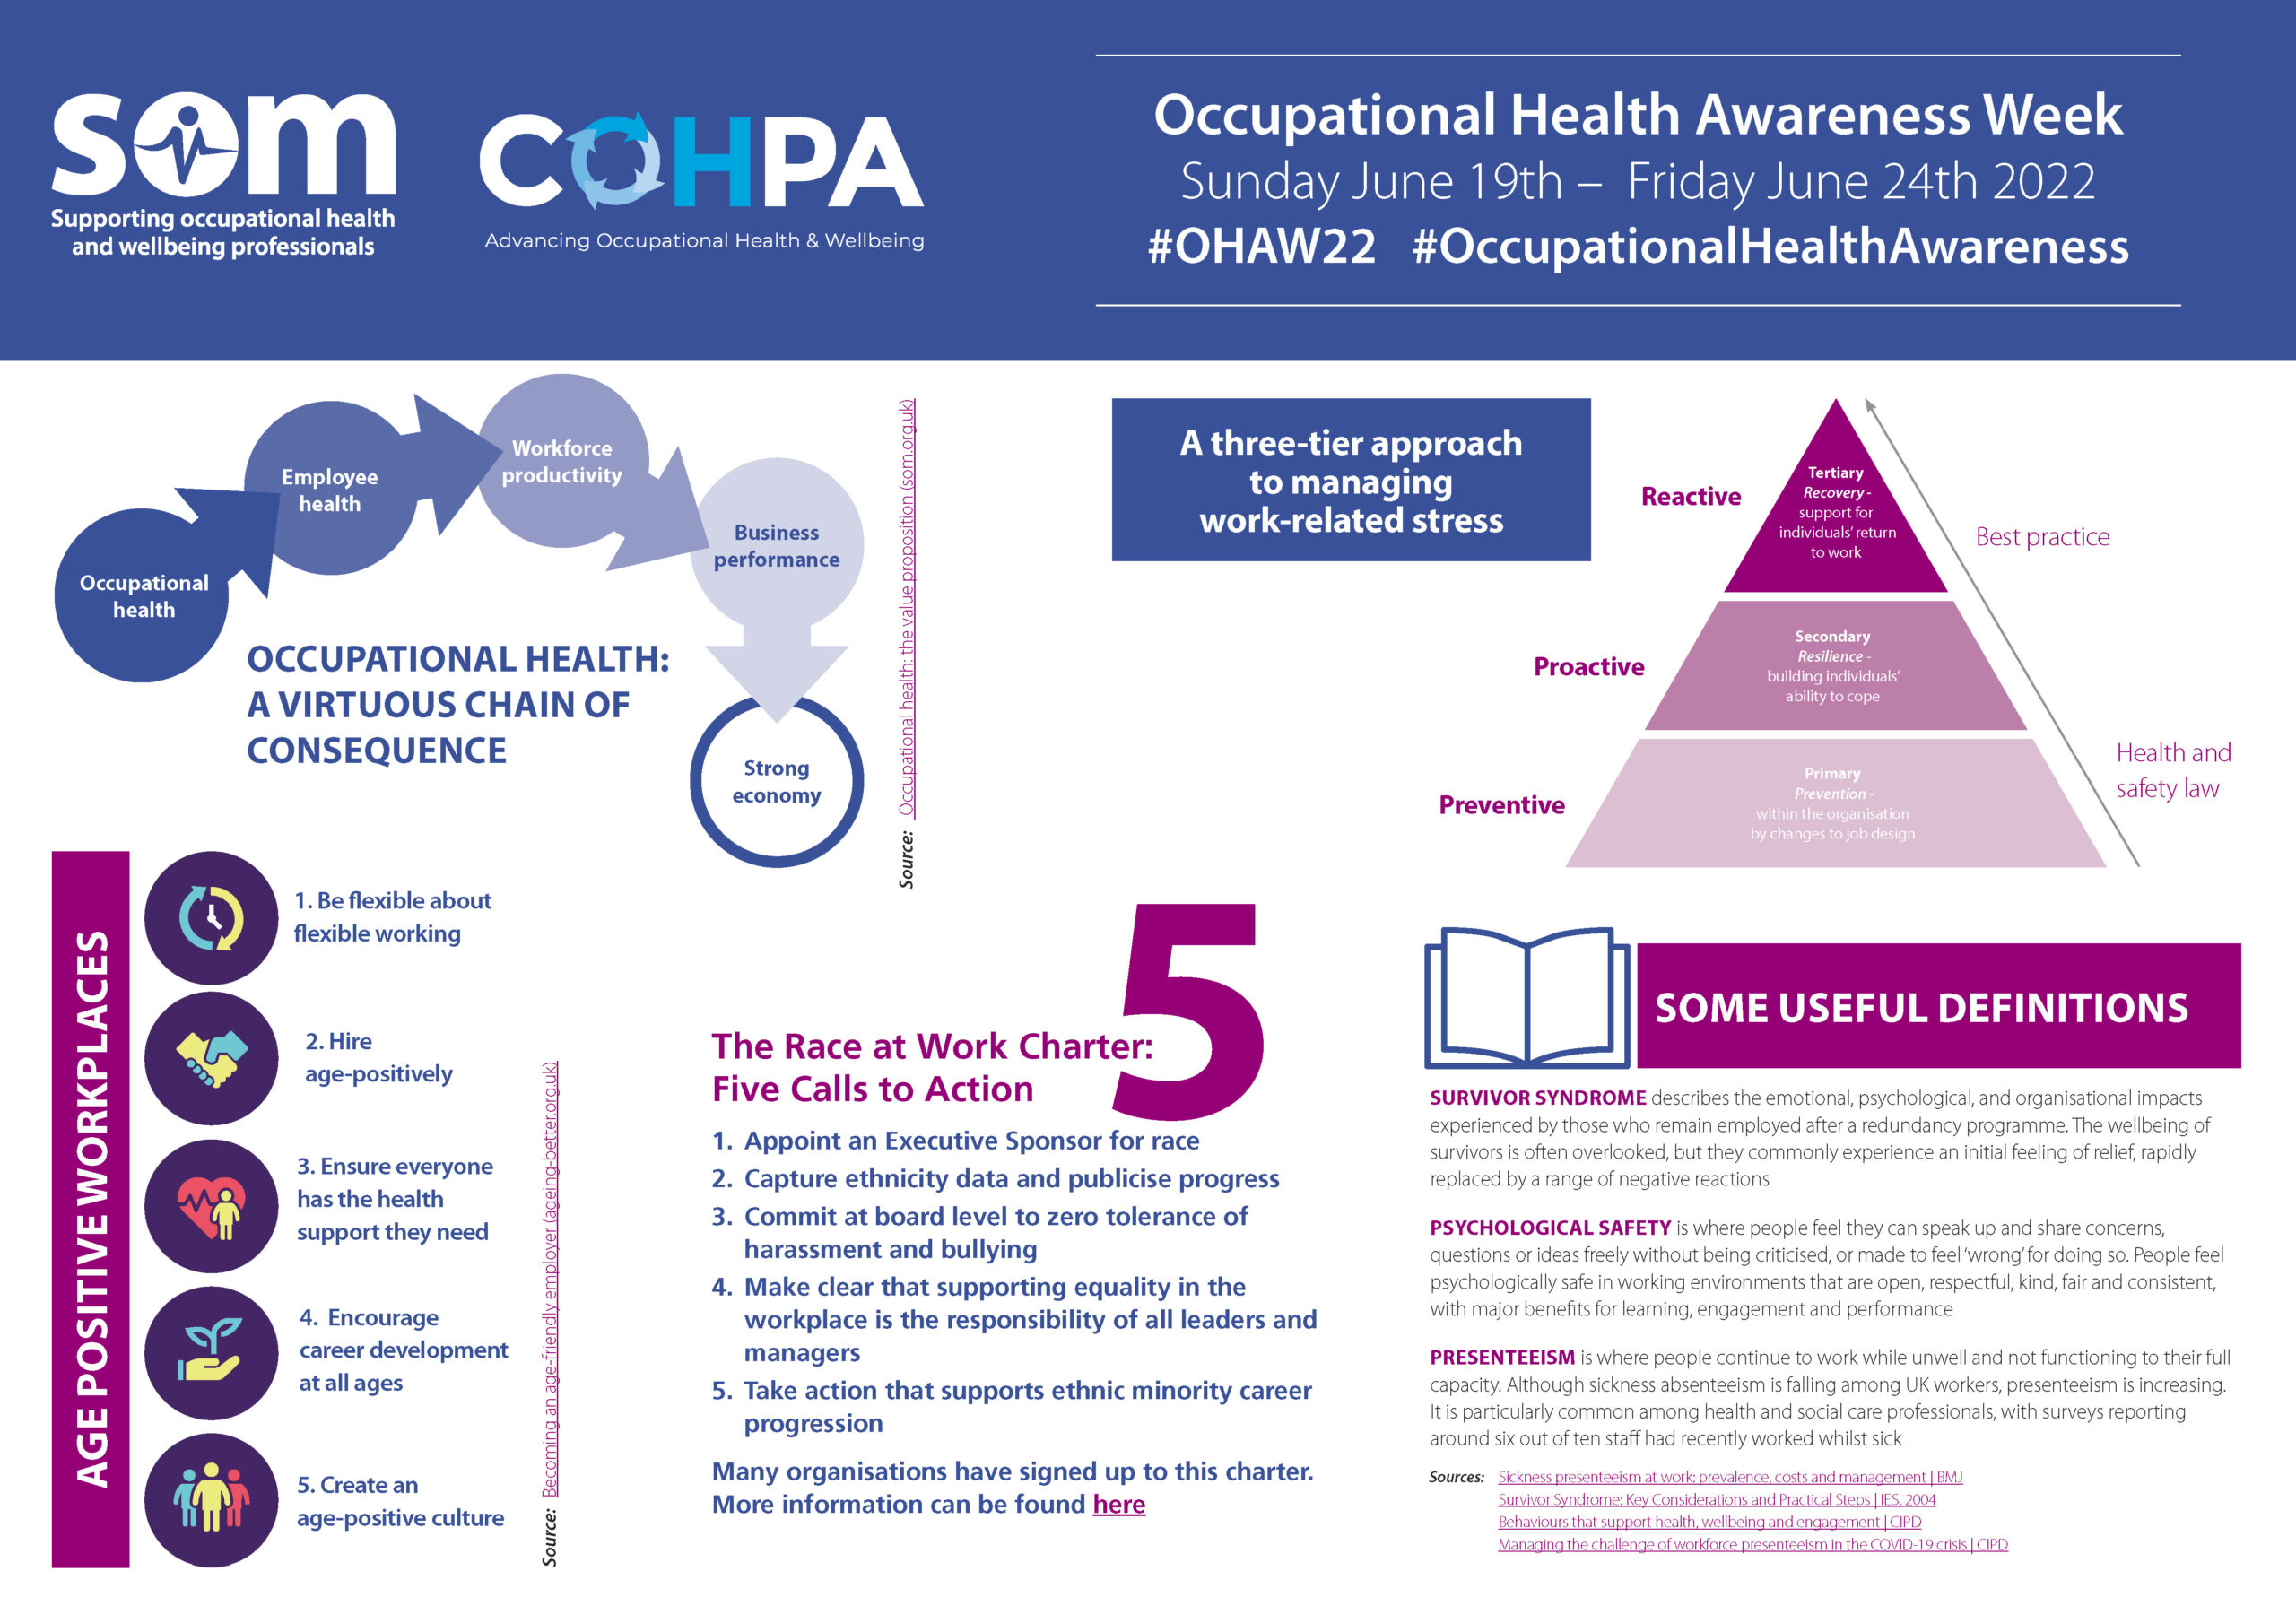 Highlights from Occupational Awareness Week 2022